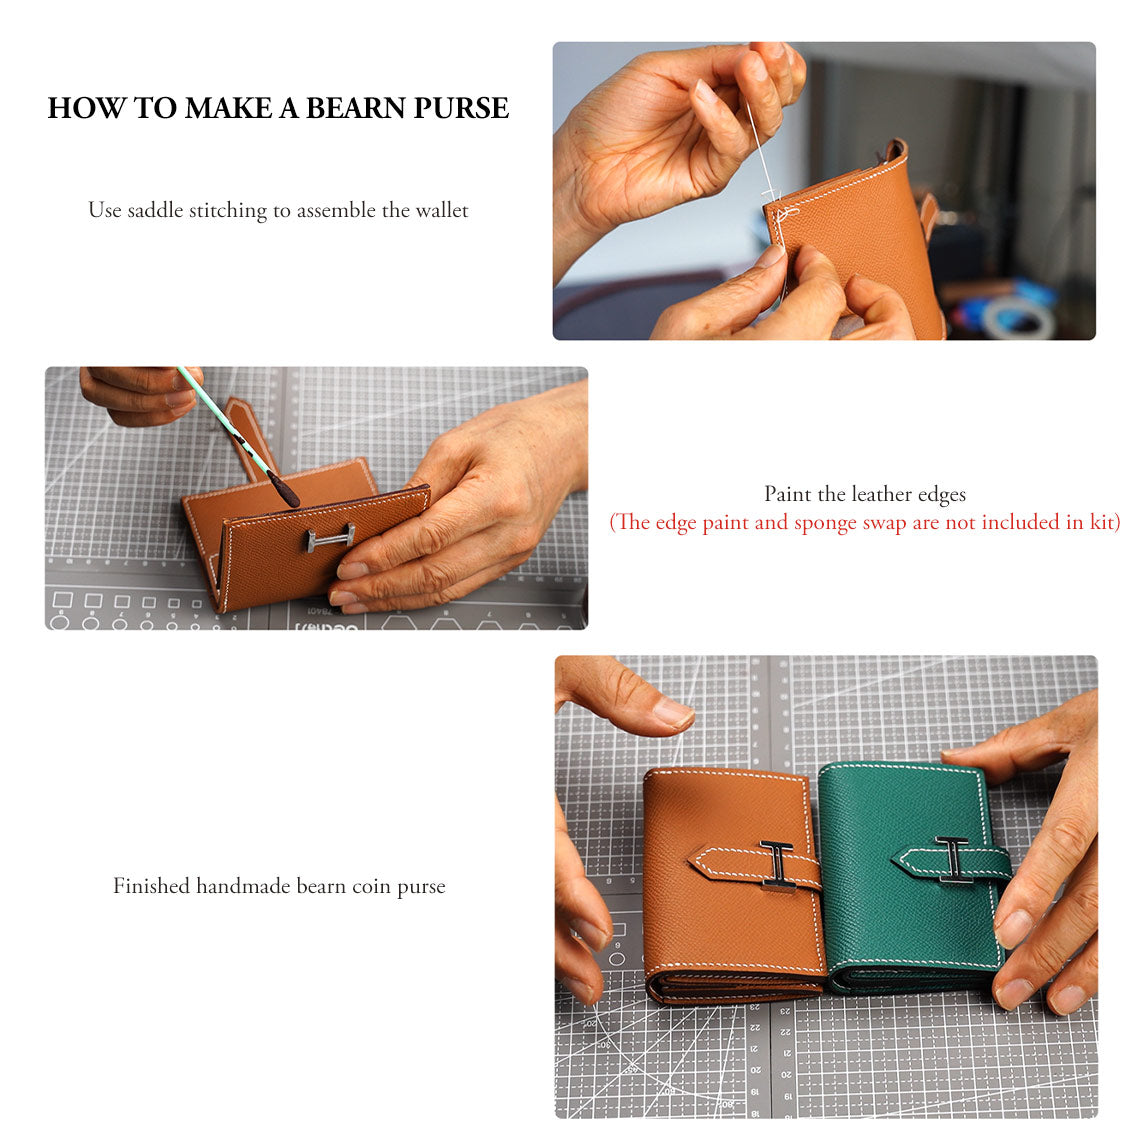 POPSEWING® Full Grain Leather Bearn Coin Wallet DIY Kits